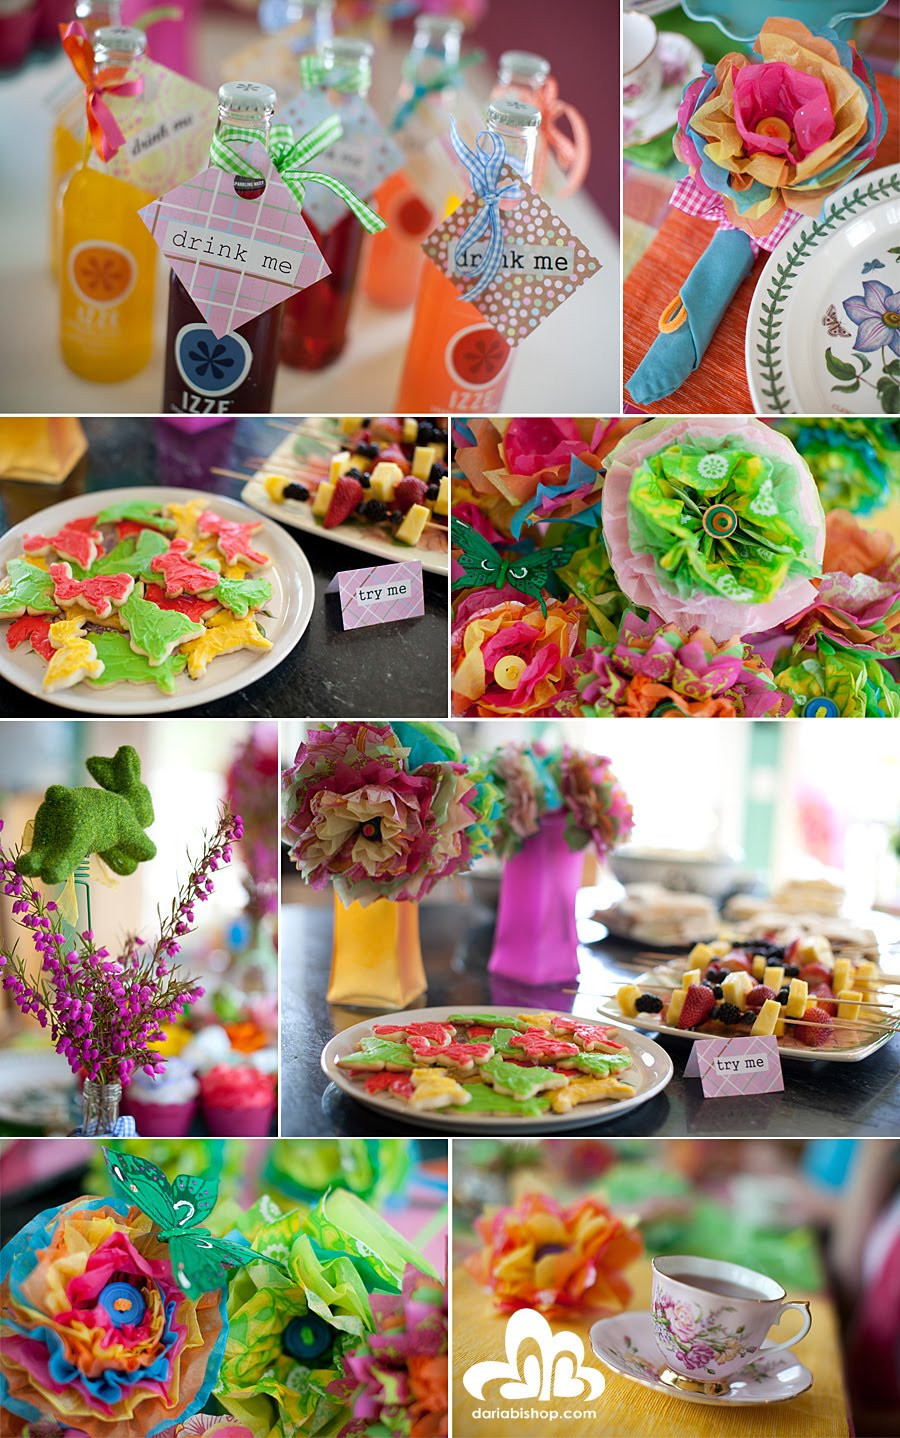 Mad Hatter Themed Tea Party Food Ideas
 Simply Creative Insanity Mad Hatters Tea Party